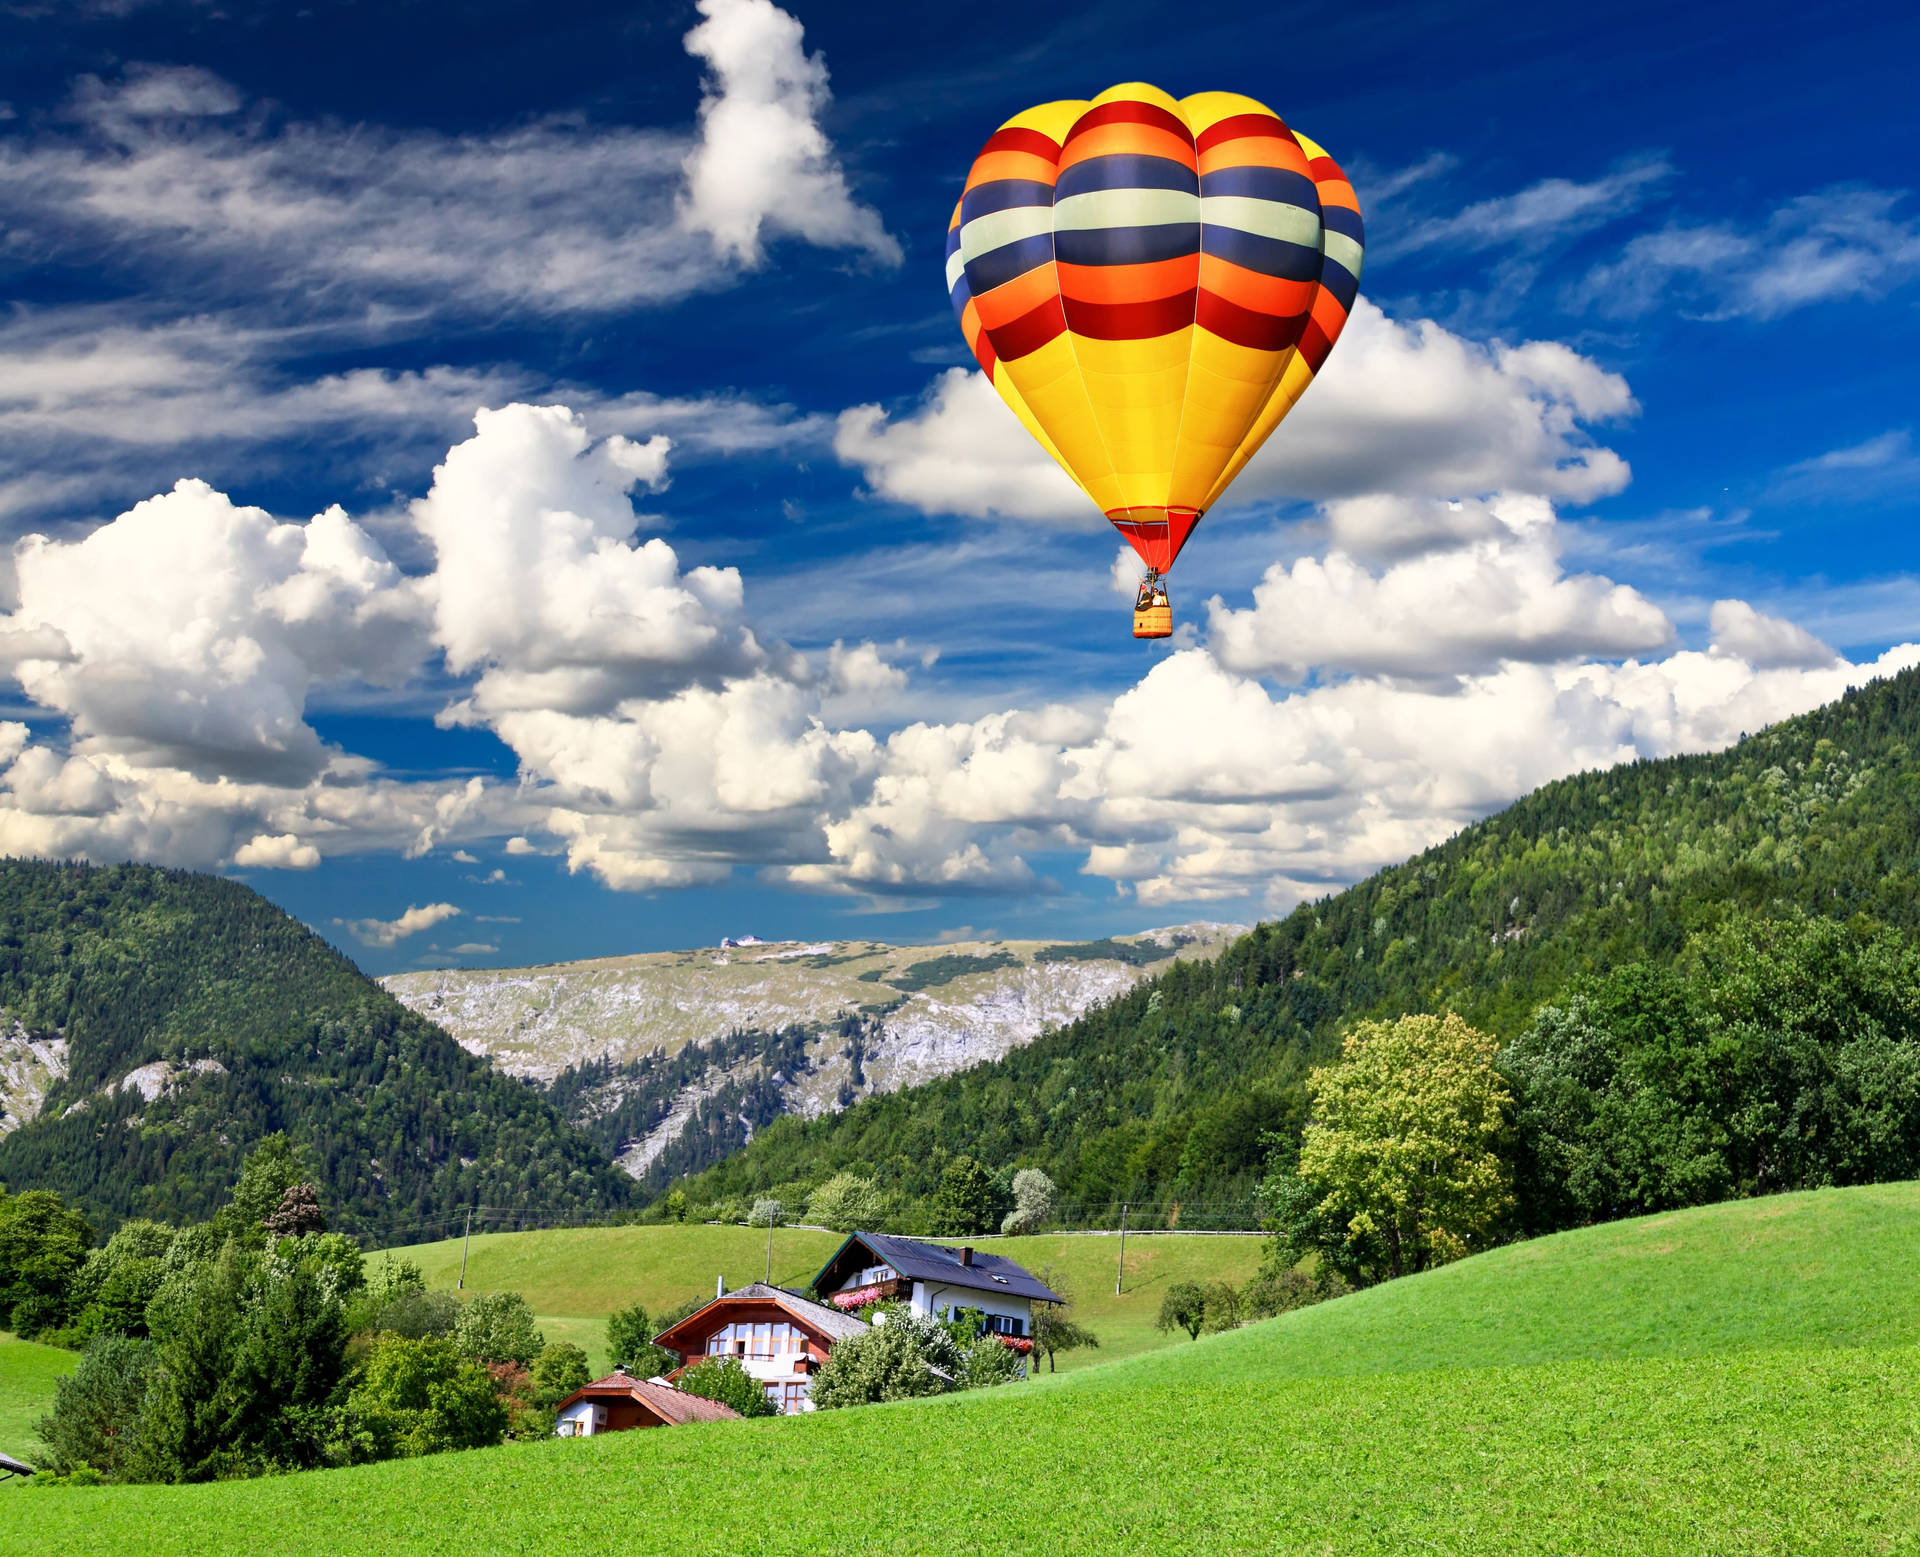 Green Hill And Hot Air Balloon Background